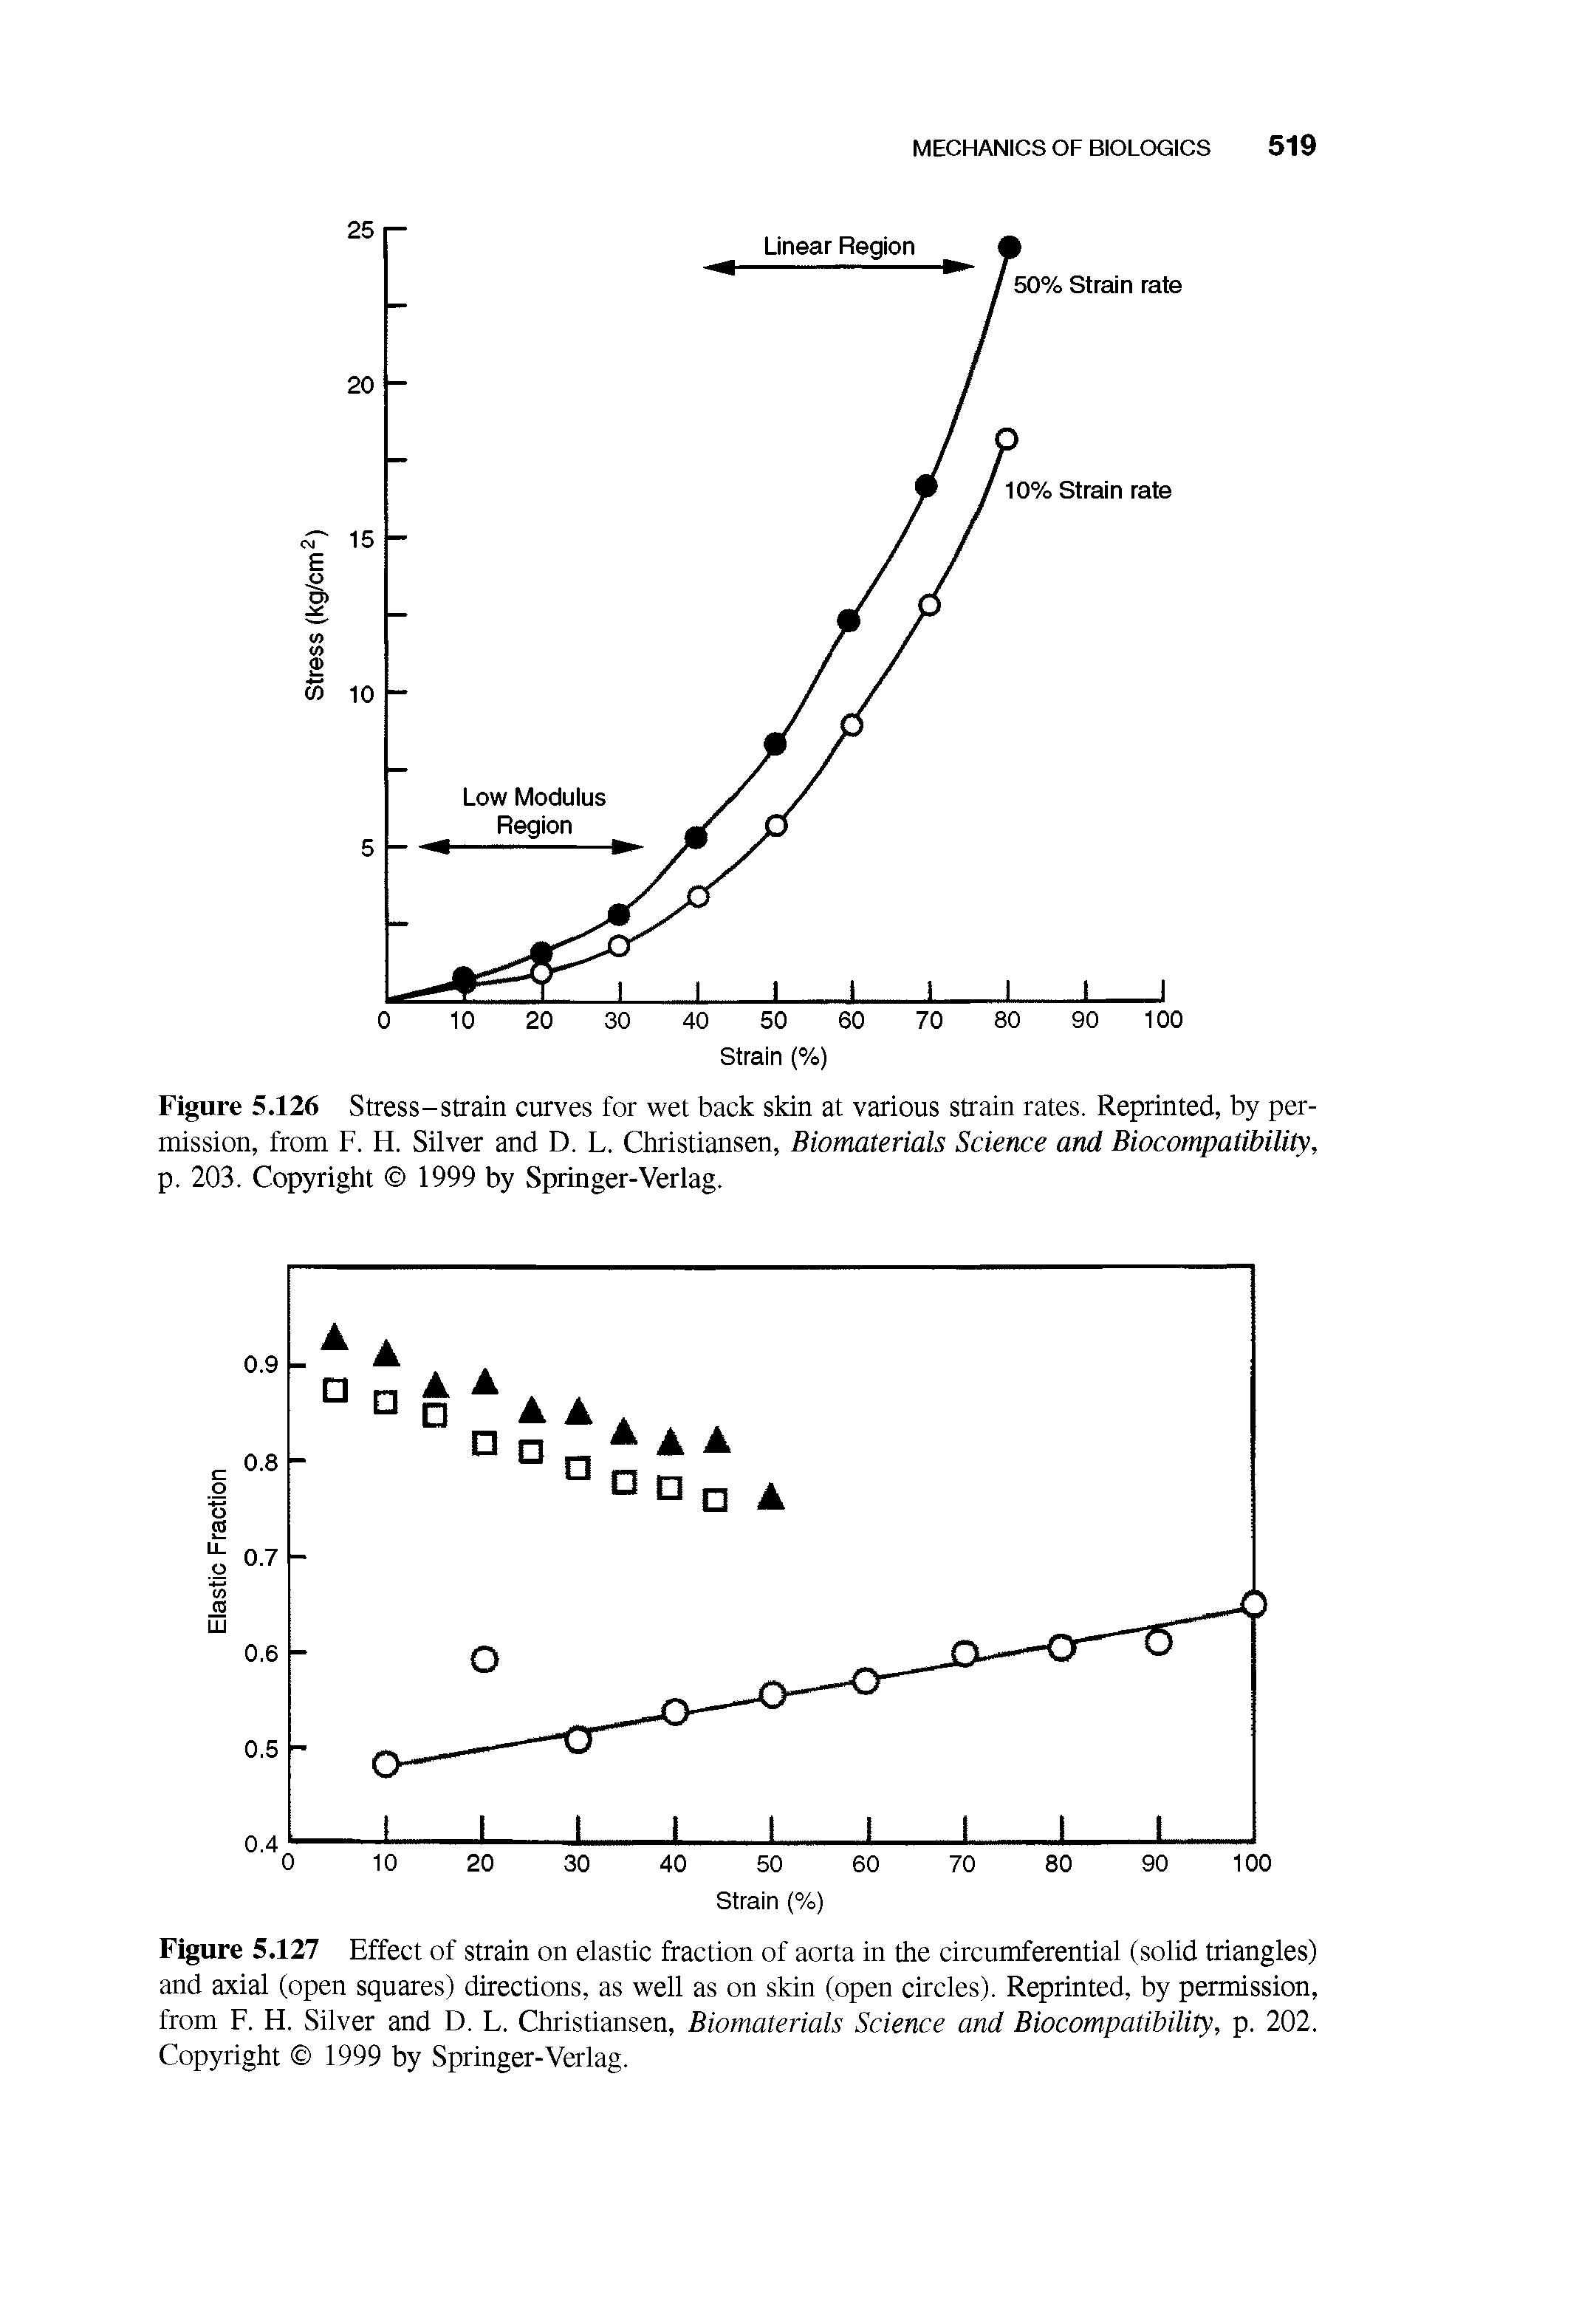 Figure 5.127 Effect of strain on elastic fraction of aorta in the circumferential (solid triangles) and axial (open squares) directions, as well as on skin (open circles). Reprinted, by permission, from F. H. Silver and D. L. Christiansen, Biomaterials Science and Biocompatibility, p. 202. Copyright 1999 by Springer-Verlag.